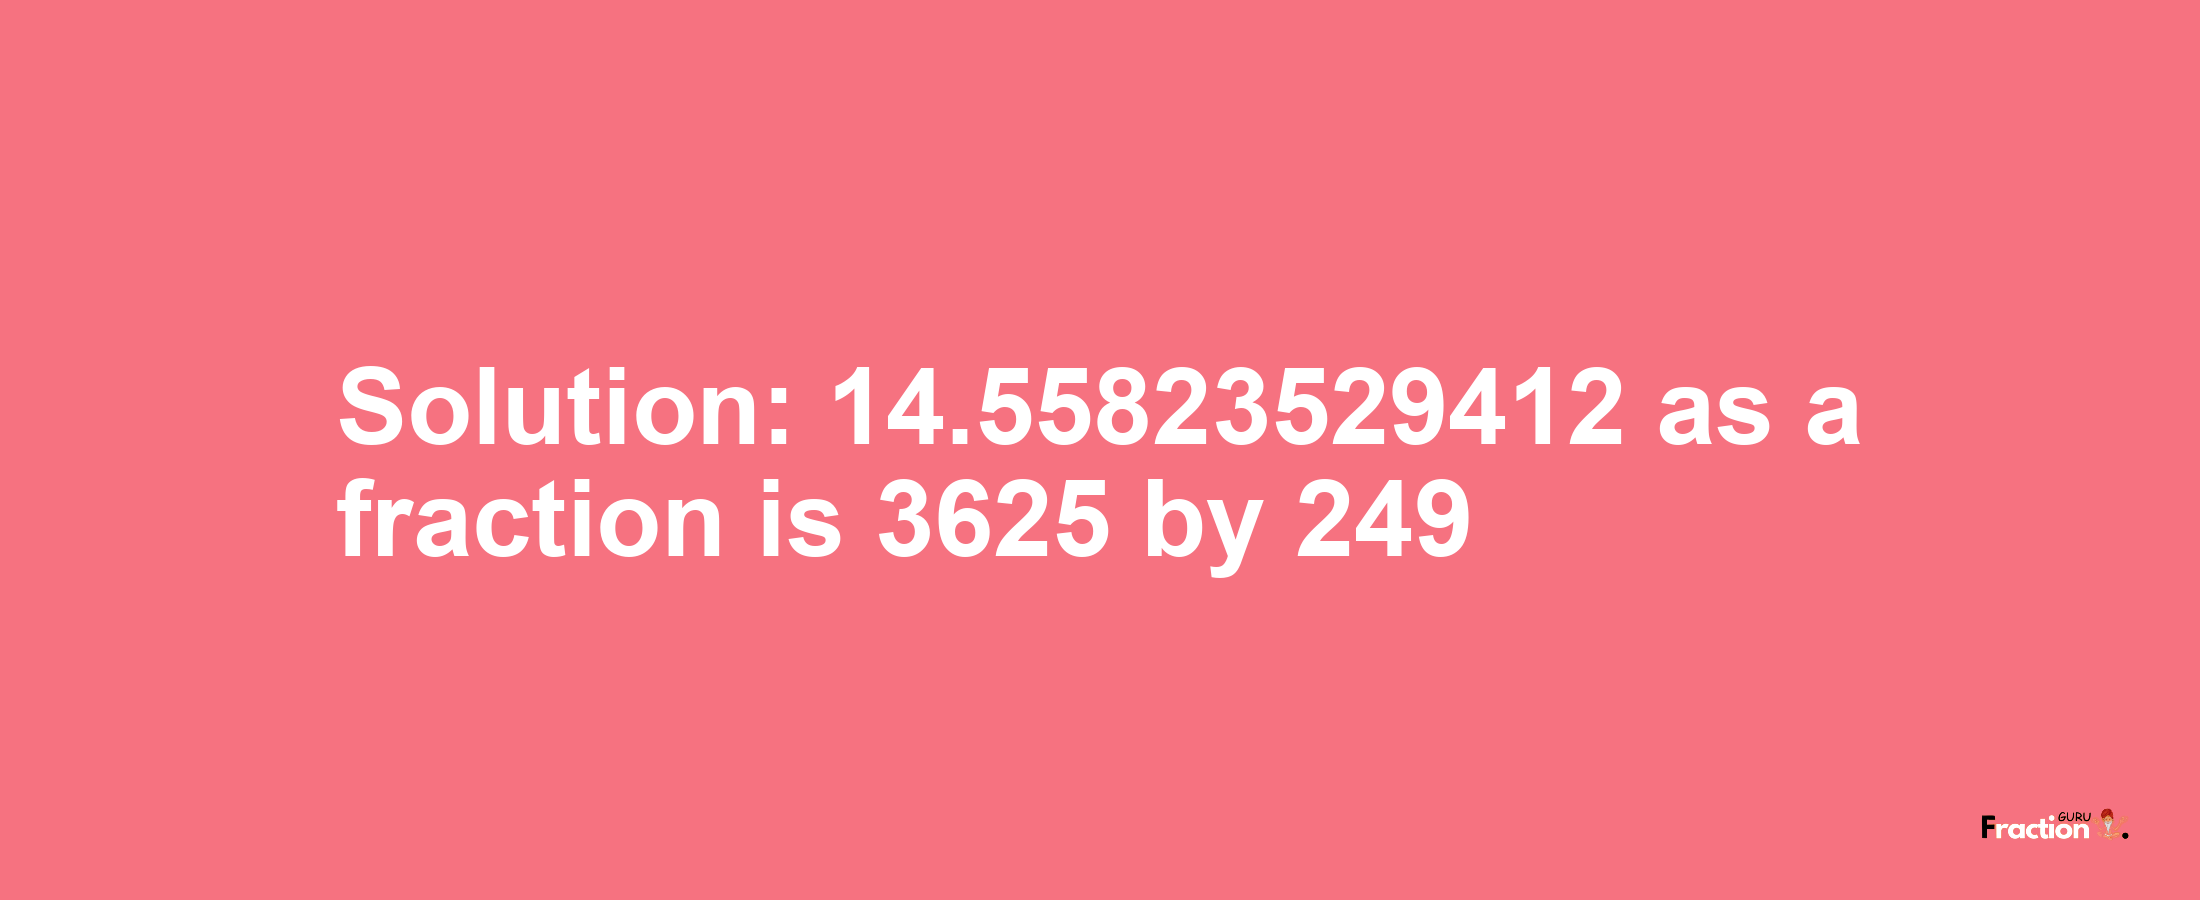 Solution:14.55823529412 as a fraction is 3625/249